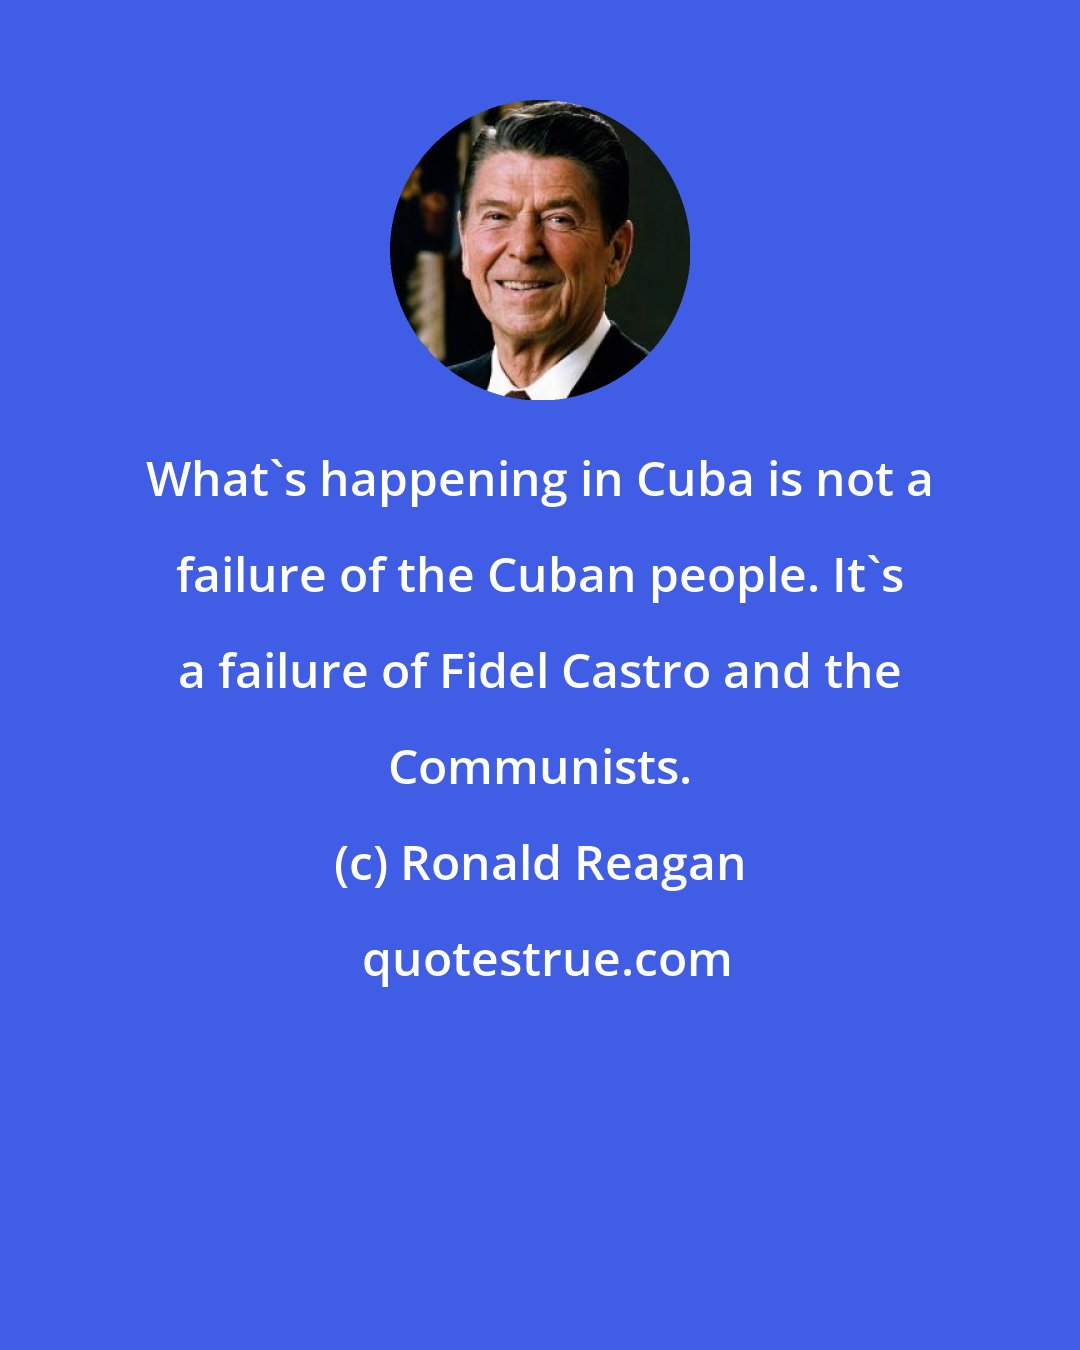 Ronald Reagan: What's happening in Cuba is not a failure of the Cuban people. It's a failure of Fidel Castro and the Communists.